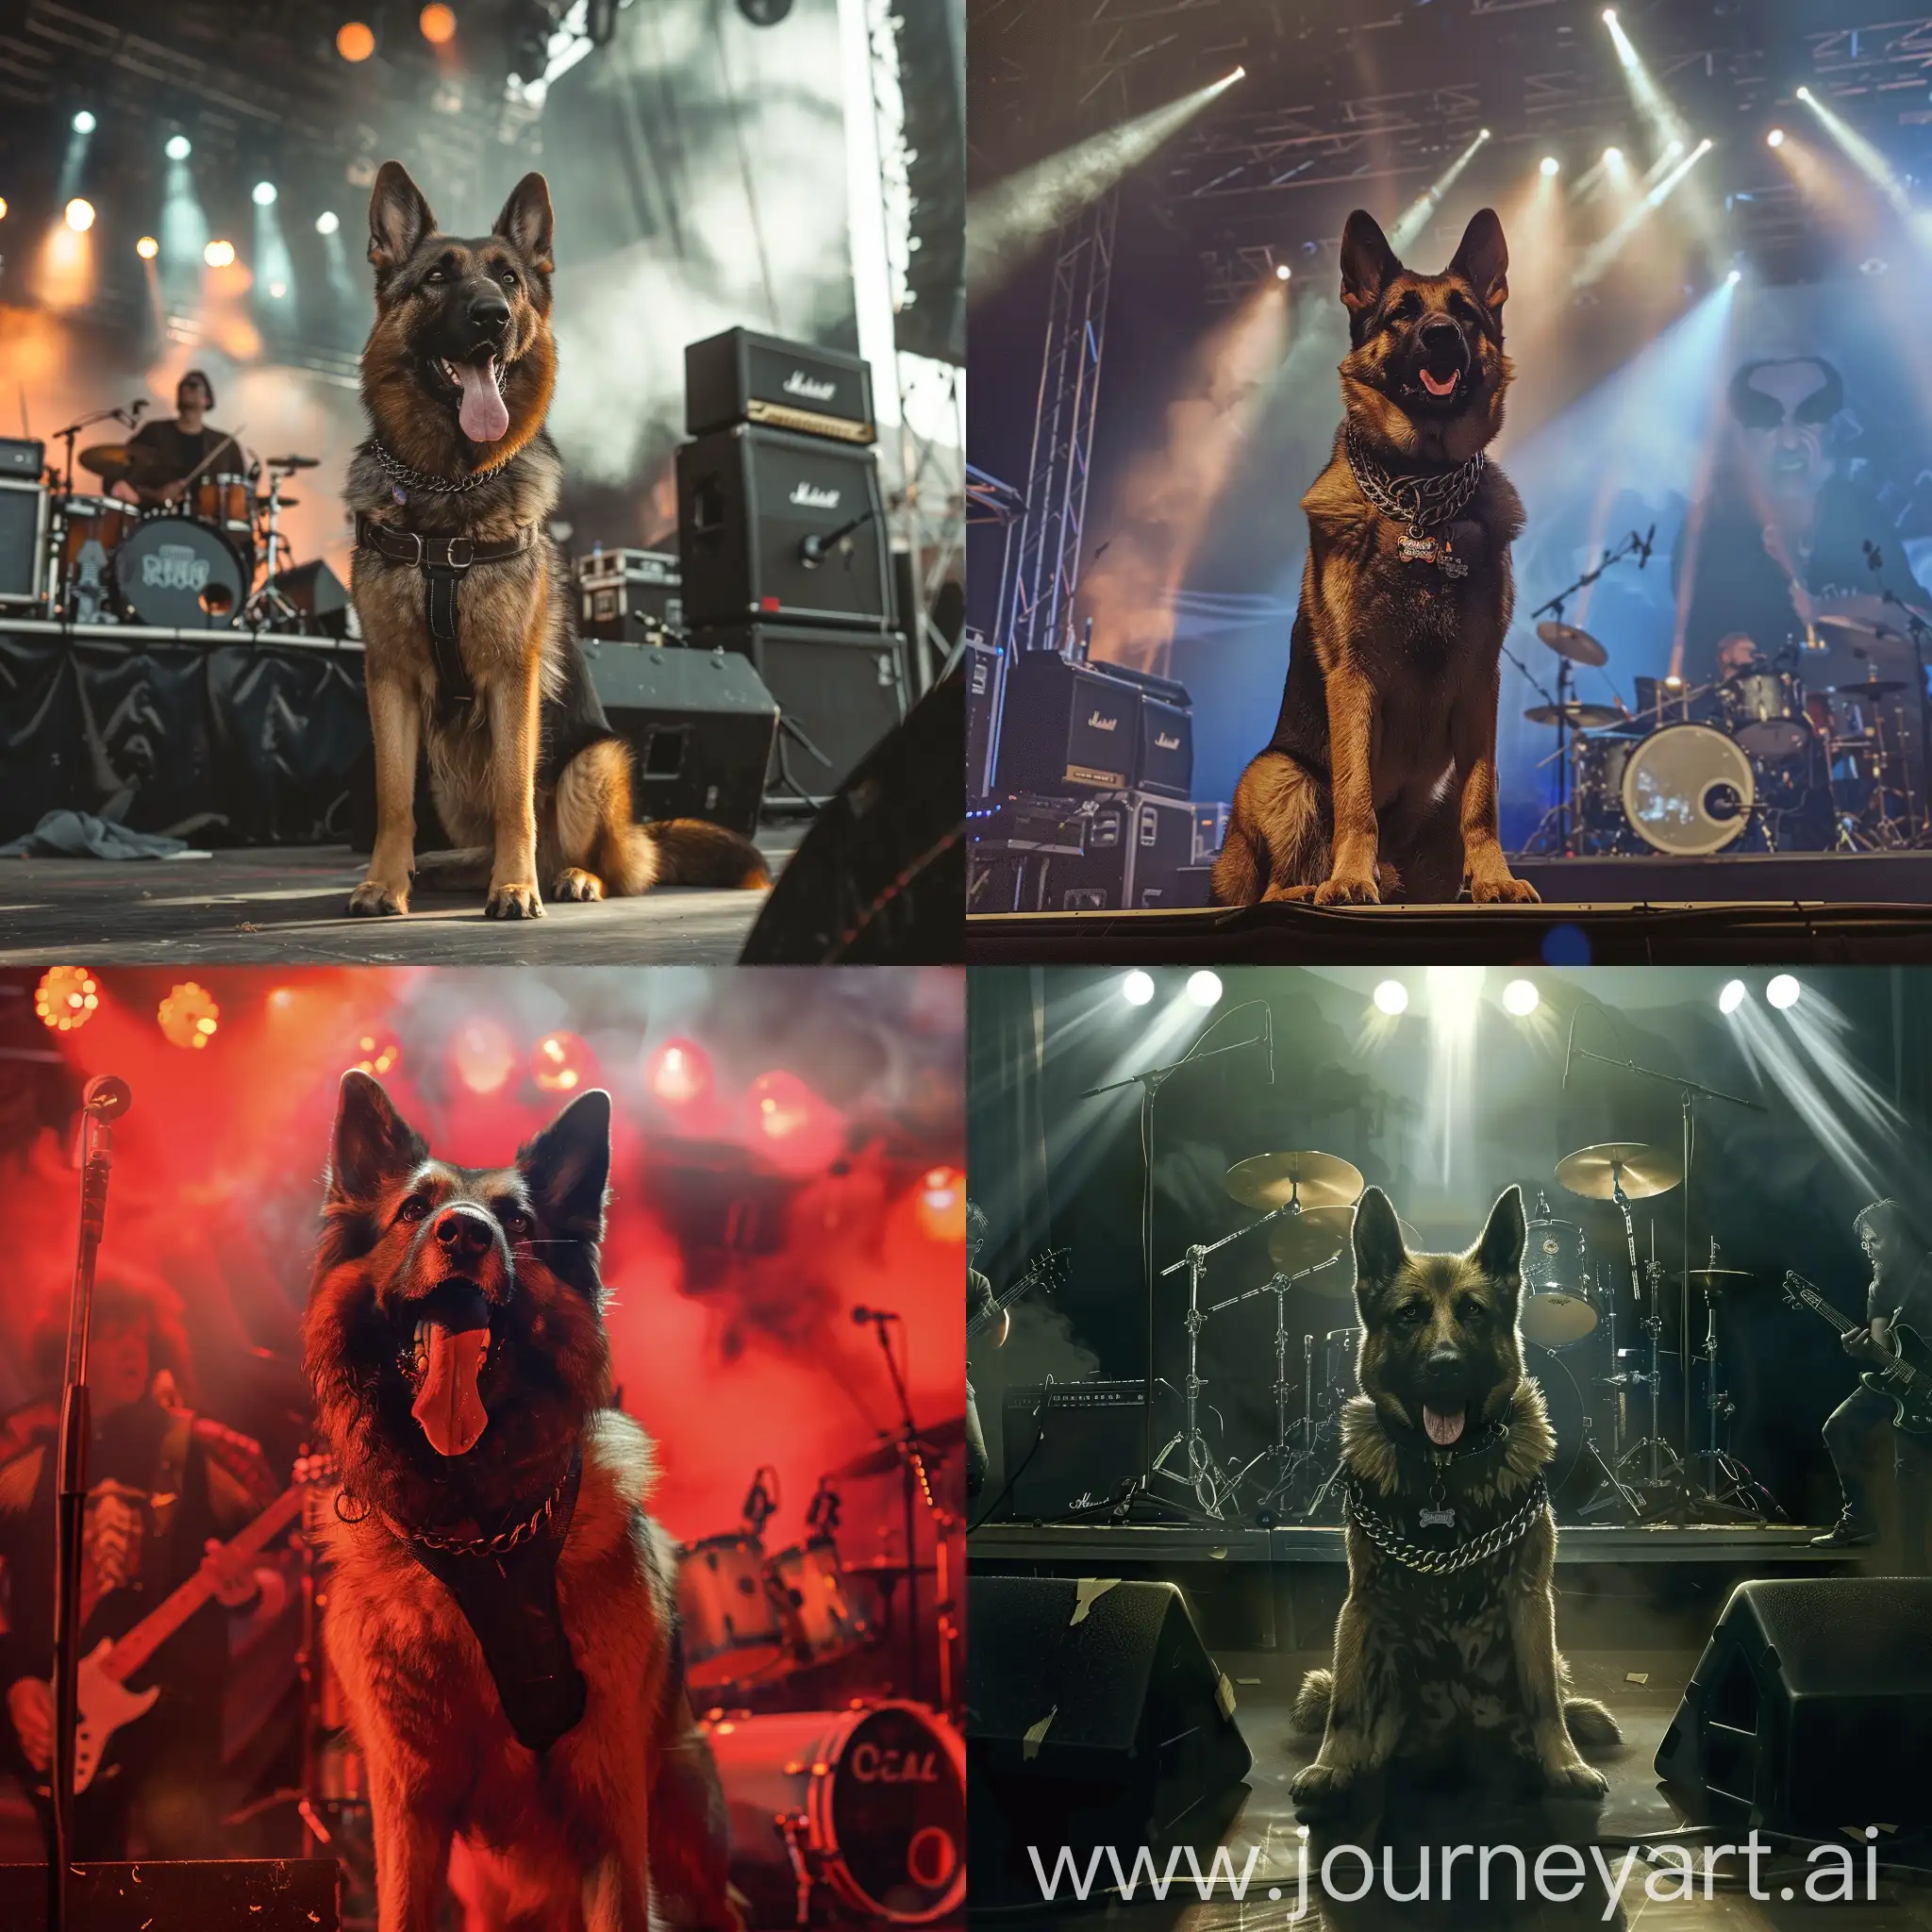 German shepherd as leader of a rockband on a concert stage